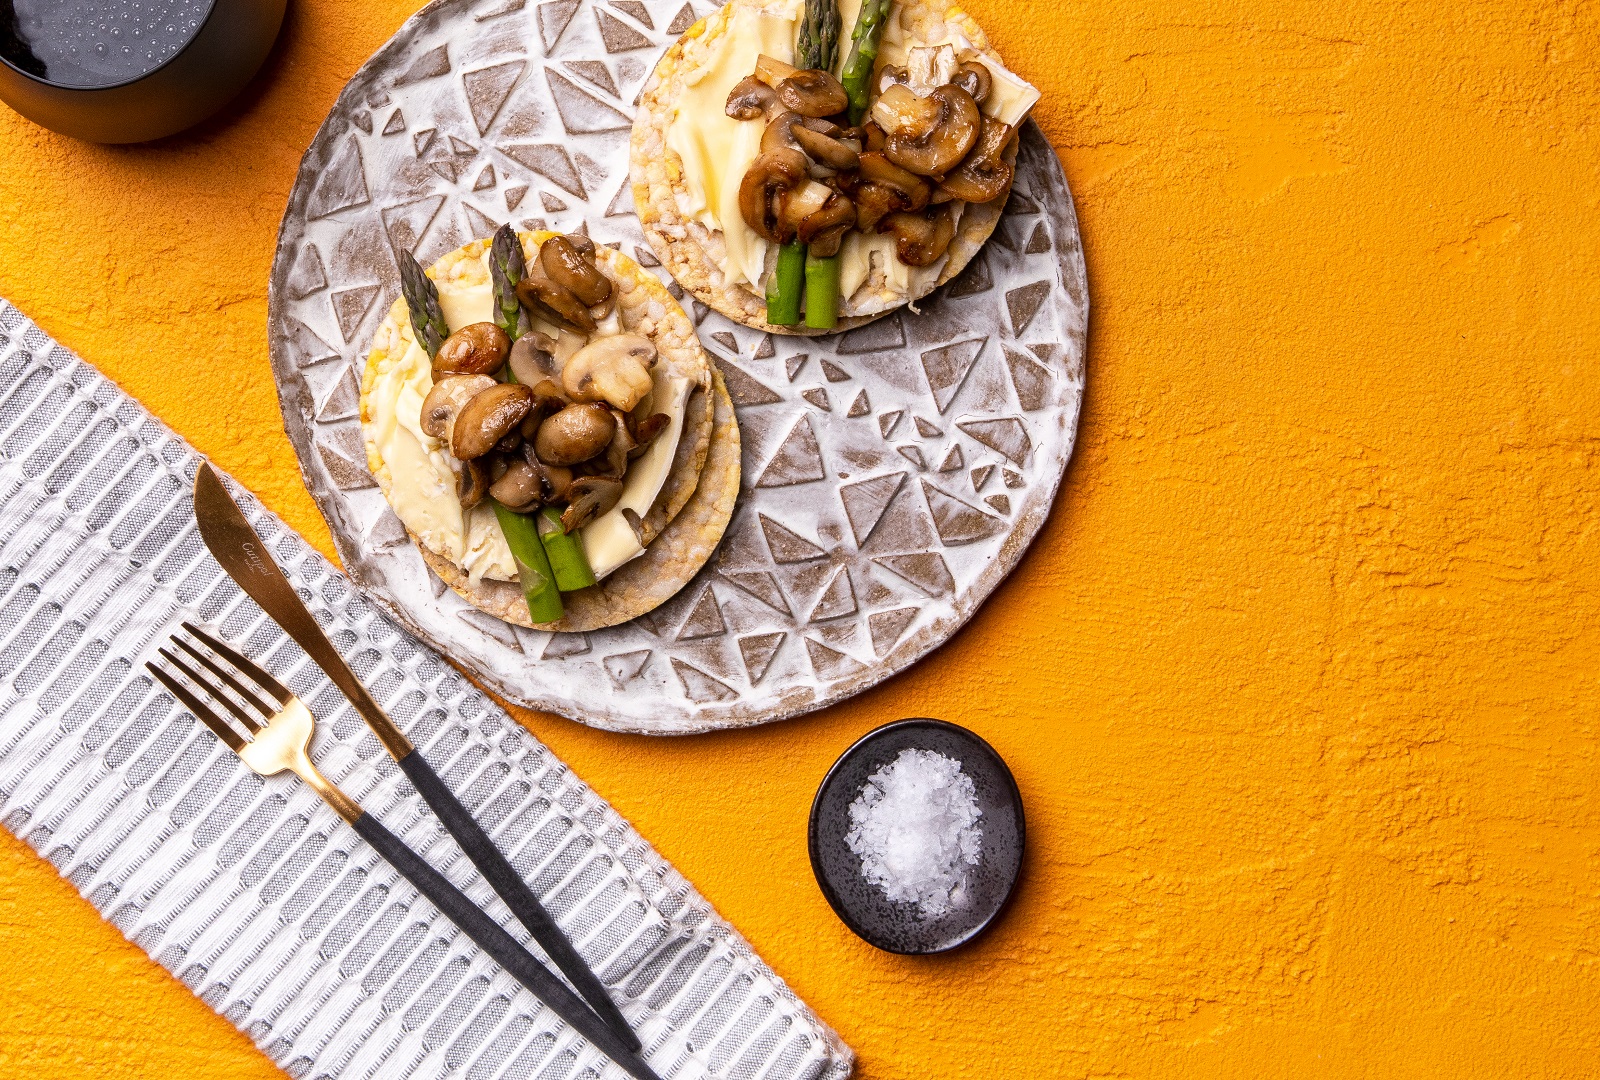 Brie, Asparagus & Grilled Mushrooms on Corn Thins skices